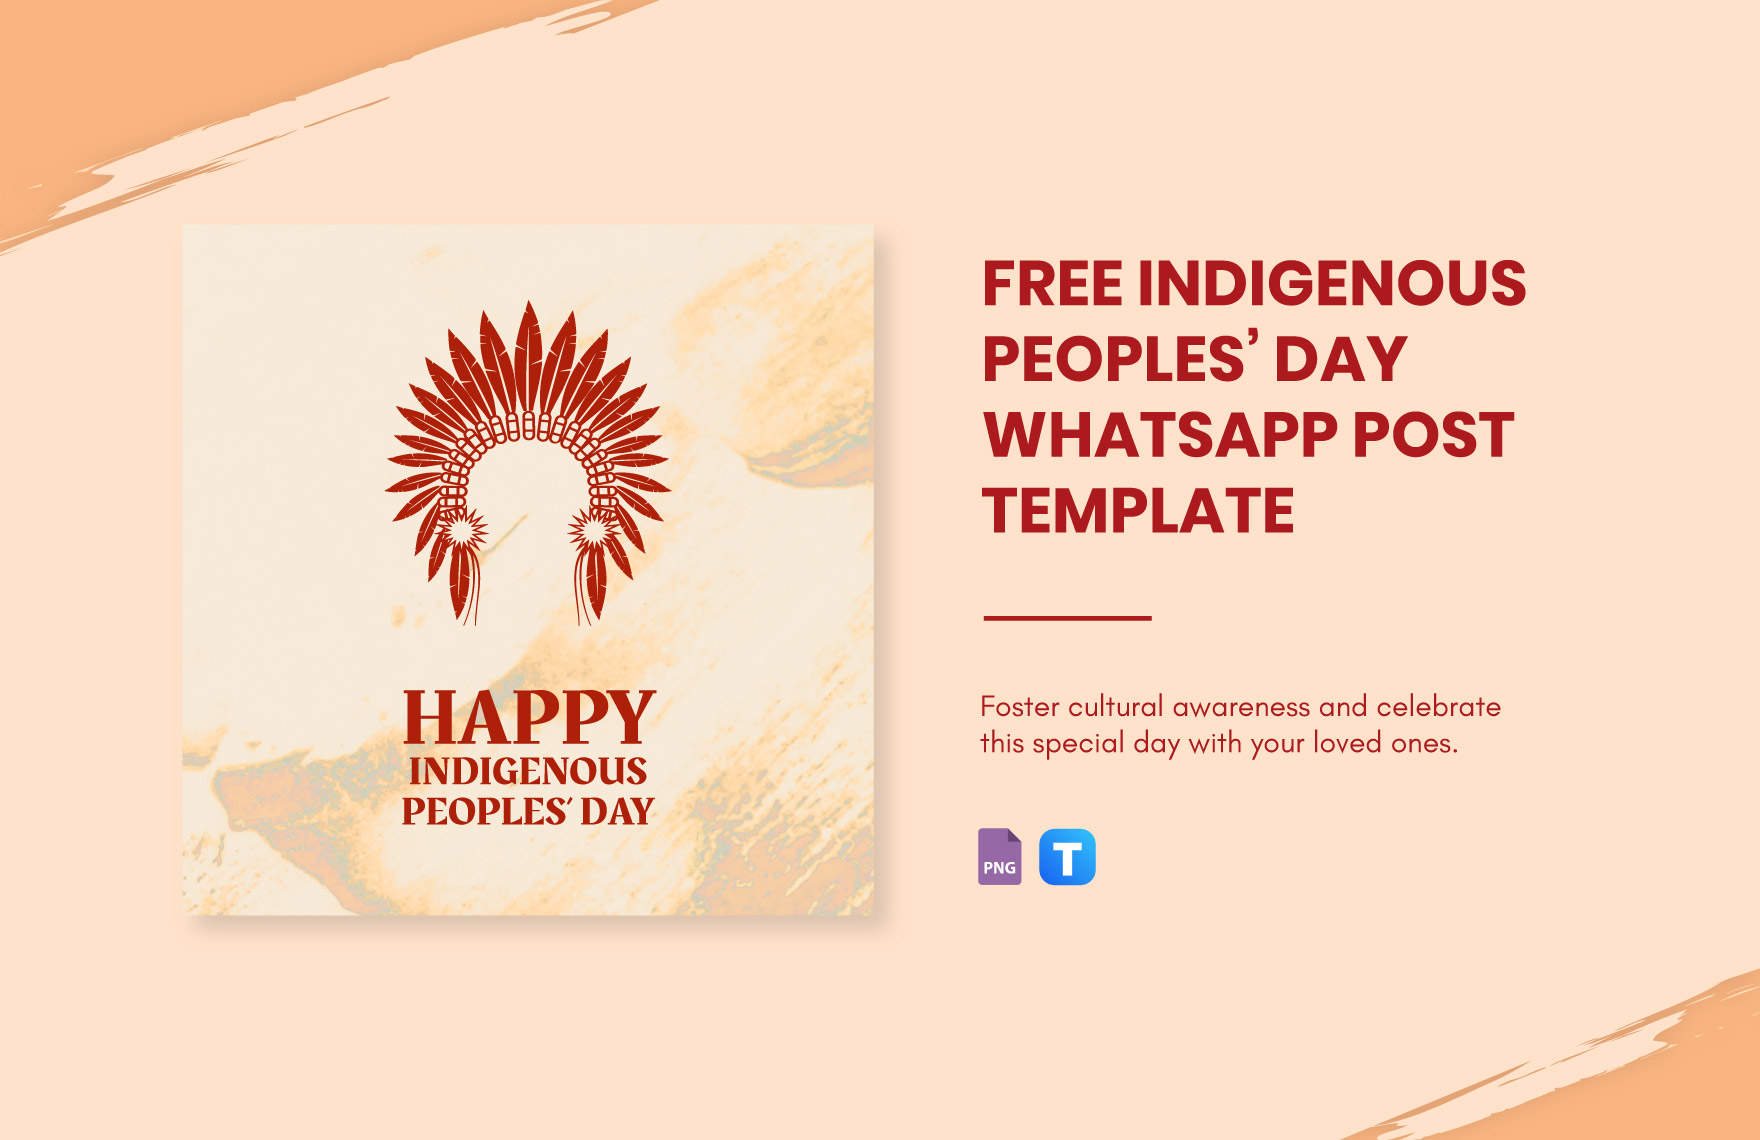 Free Indigenous Peoples' Day WhatsApp Post Template